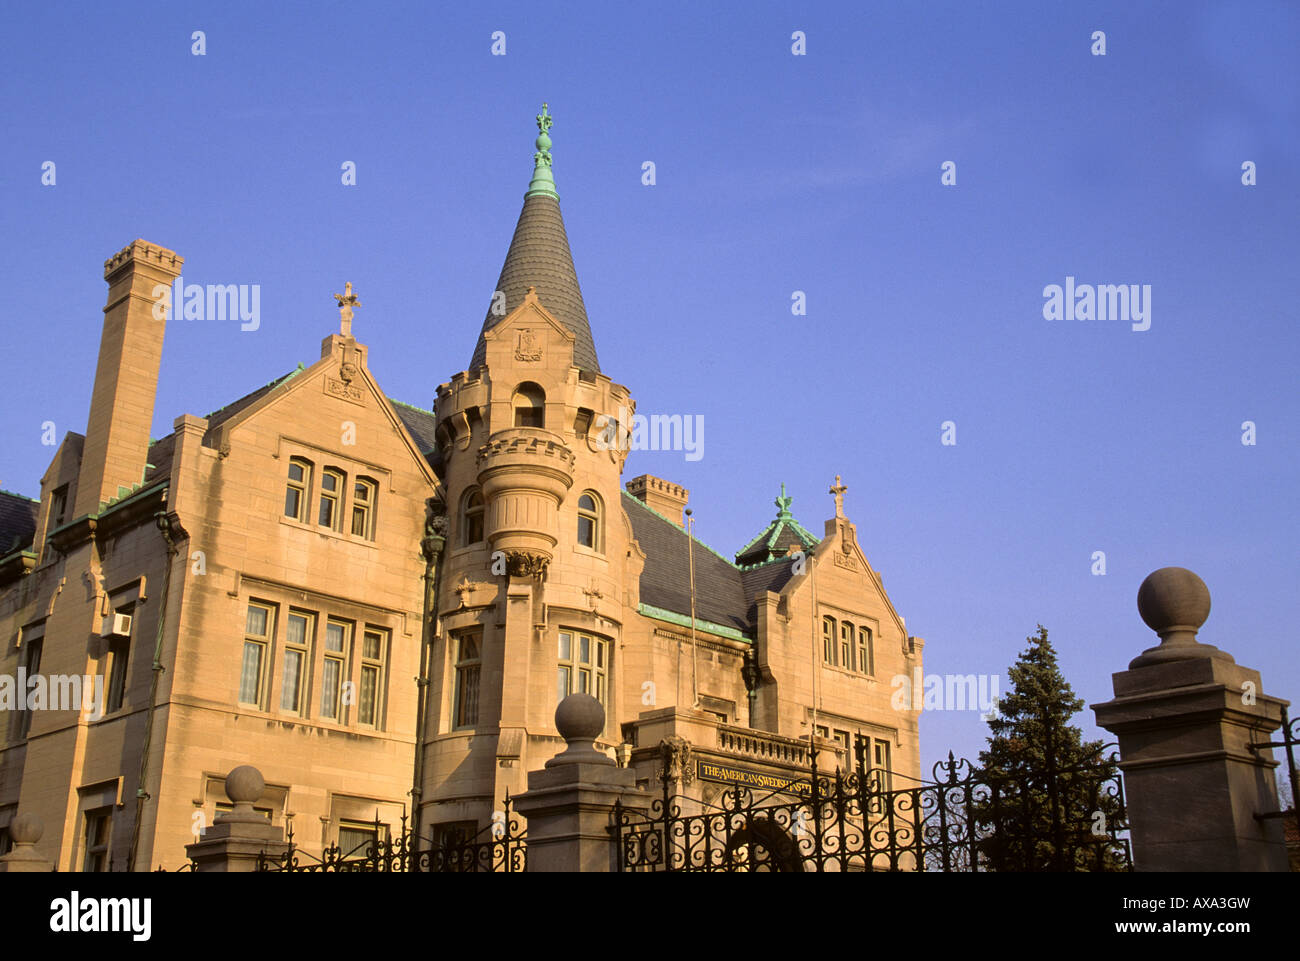 THE AMERICAN SWEDISH INSTITUTE, LOCATED IN THE FORMER TURNBLAD MANSION, MINNEAPOLIS, MINNESOTA, U.S.A. Stock Photo